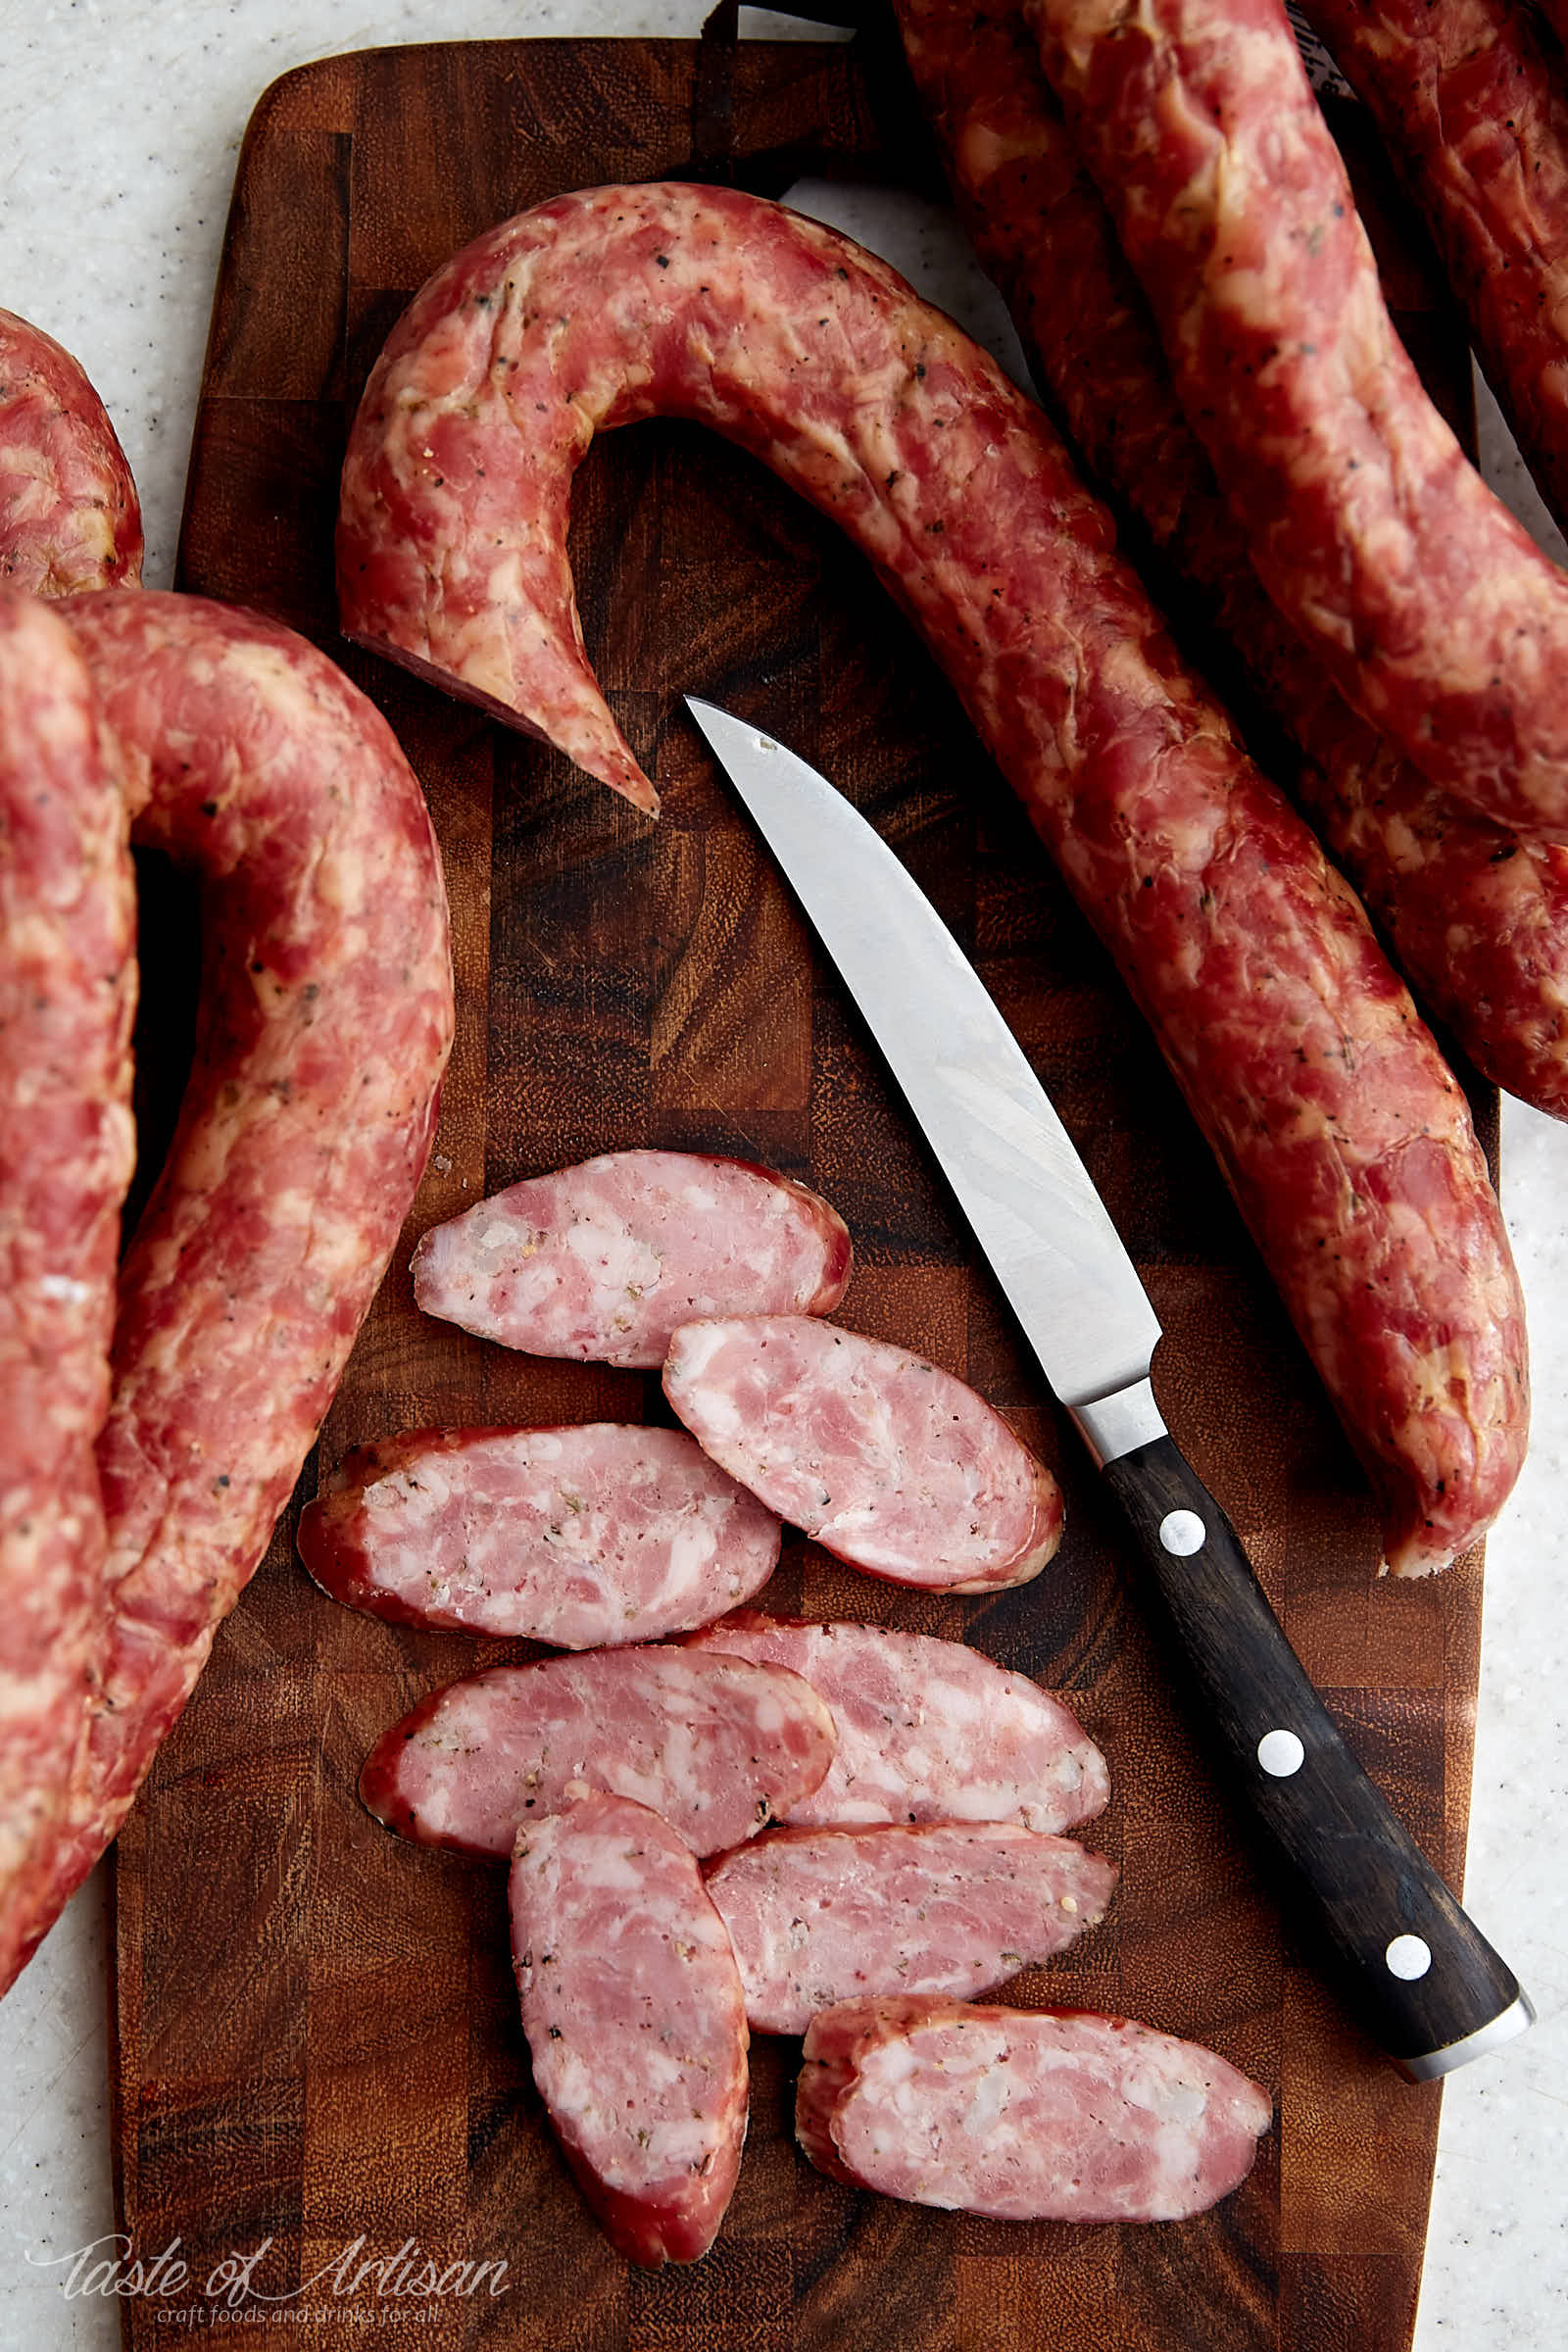 Learn how to make authentic Polish kielbasa (sausage) at home. The name of this kielbasa is Swojska, which means homemade or self-made. It's one of the best and most flavorful Polish sausages.| Taste of Artisan